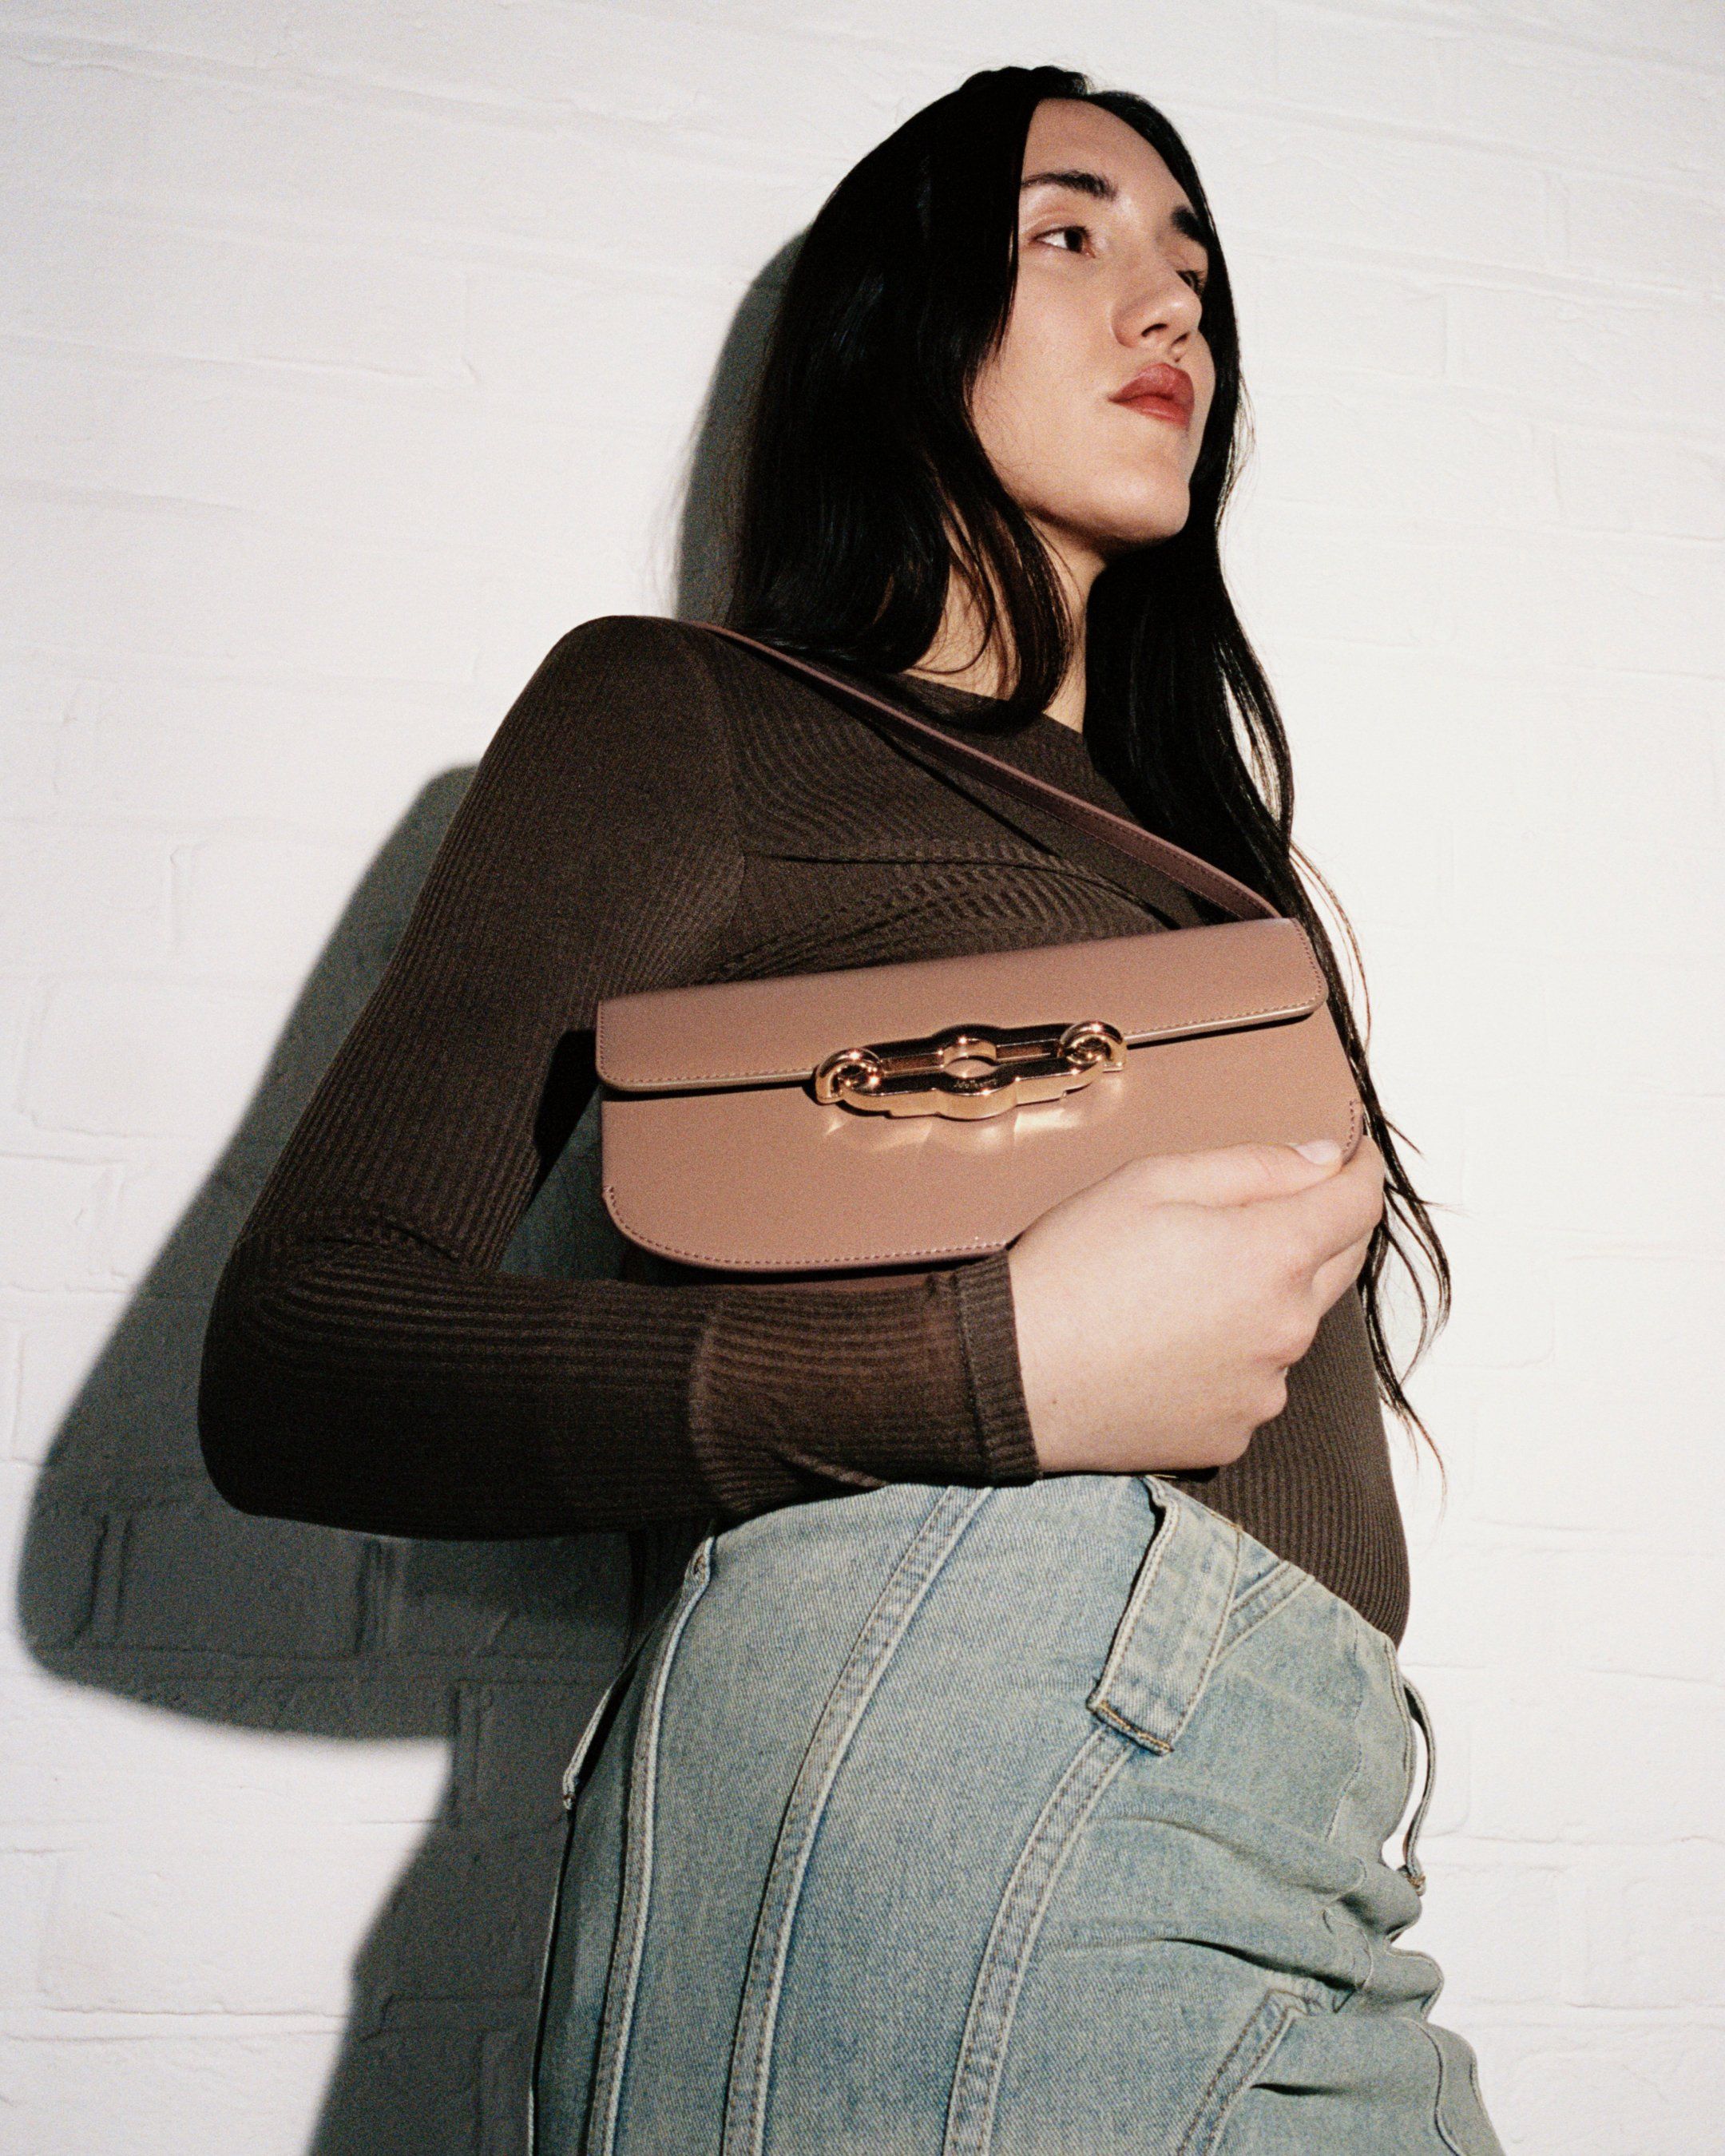 Model holding the E/W Pimlico bag from Mulberry in beige leather